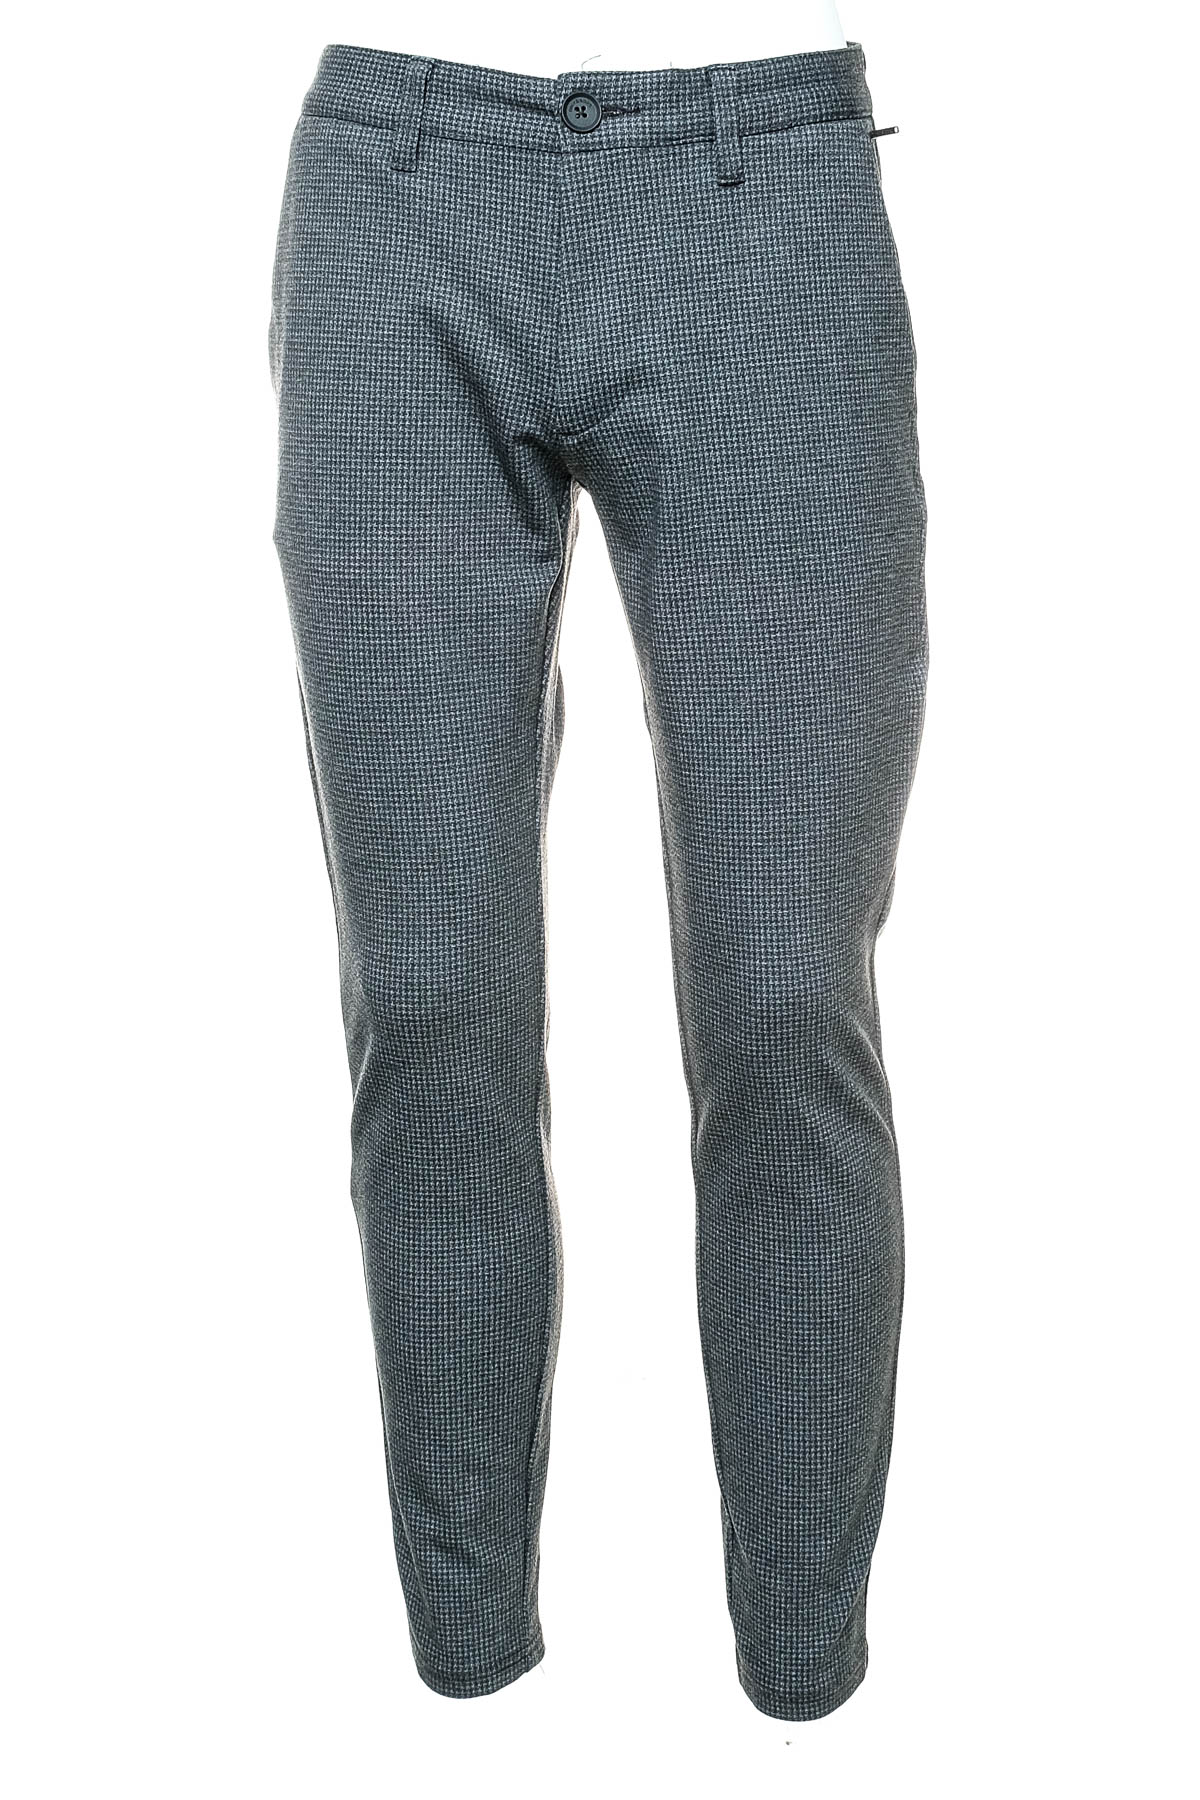 Men's trousers - ONLY & SONS - 0